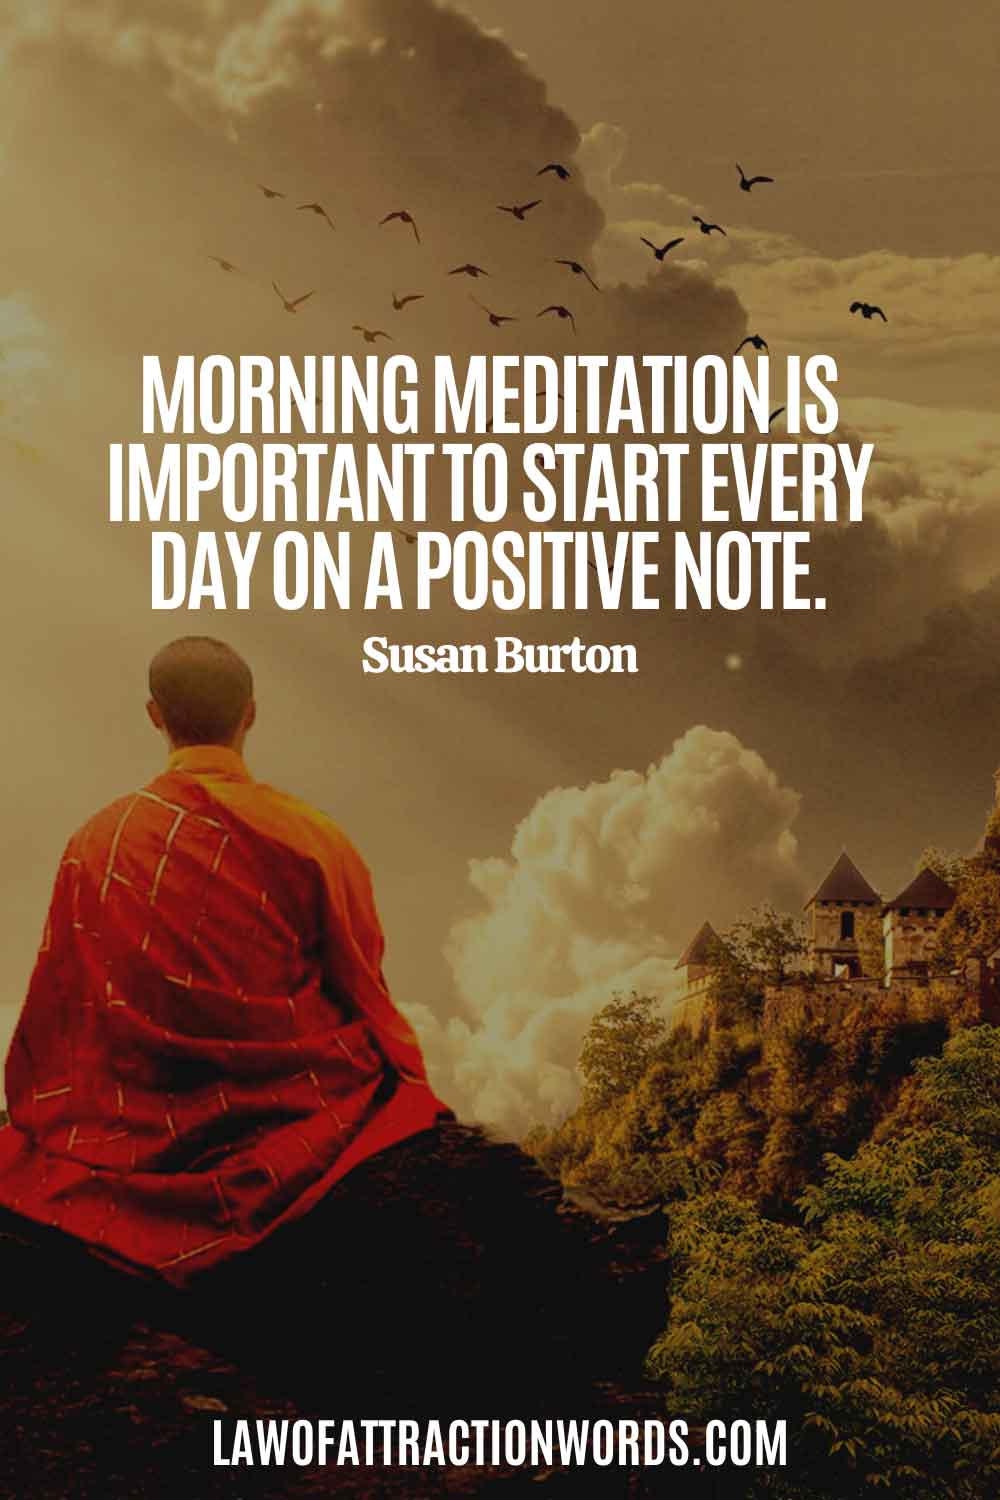 58 Good Morning Meditation Quotes That Will Calm Your Minds